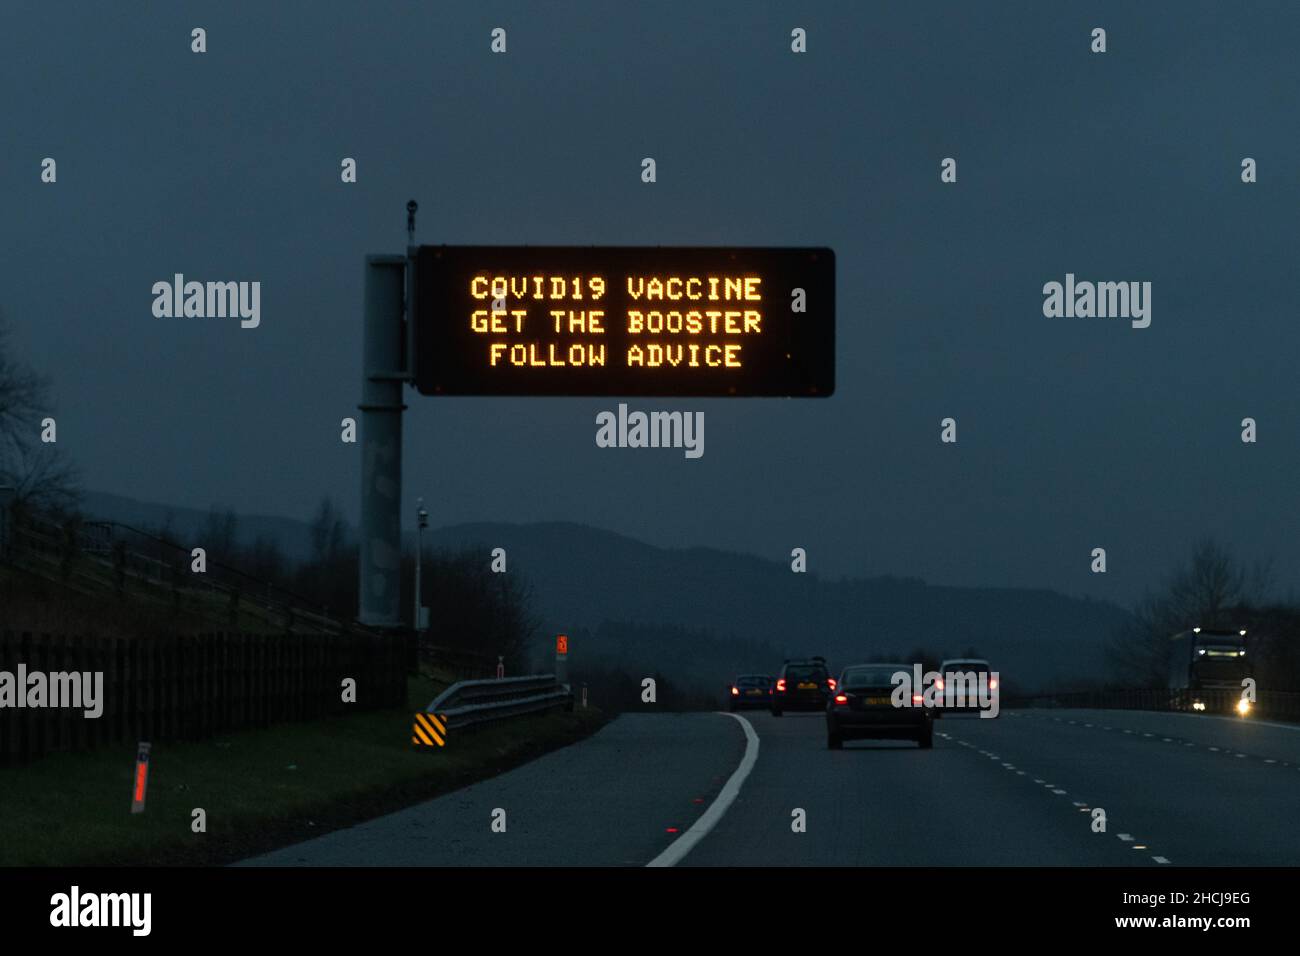 Scotland, UK. 29th Dec, 2021. The Covid-19 booster push in Scotland includes giant 'Covid-19 Vaccine Get the Booster Follow Advice' motorway gantry signs. Pictured - sign on M74 motorway heading north towards Glasgow Credit: Kay Roxby/Alamy Live News Stock Photo